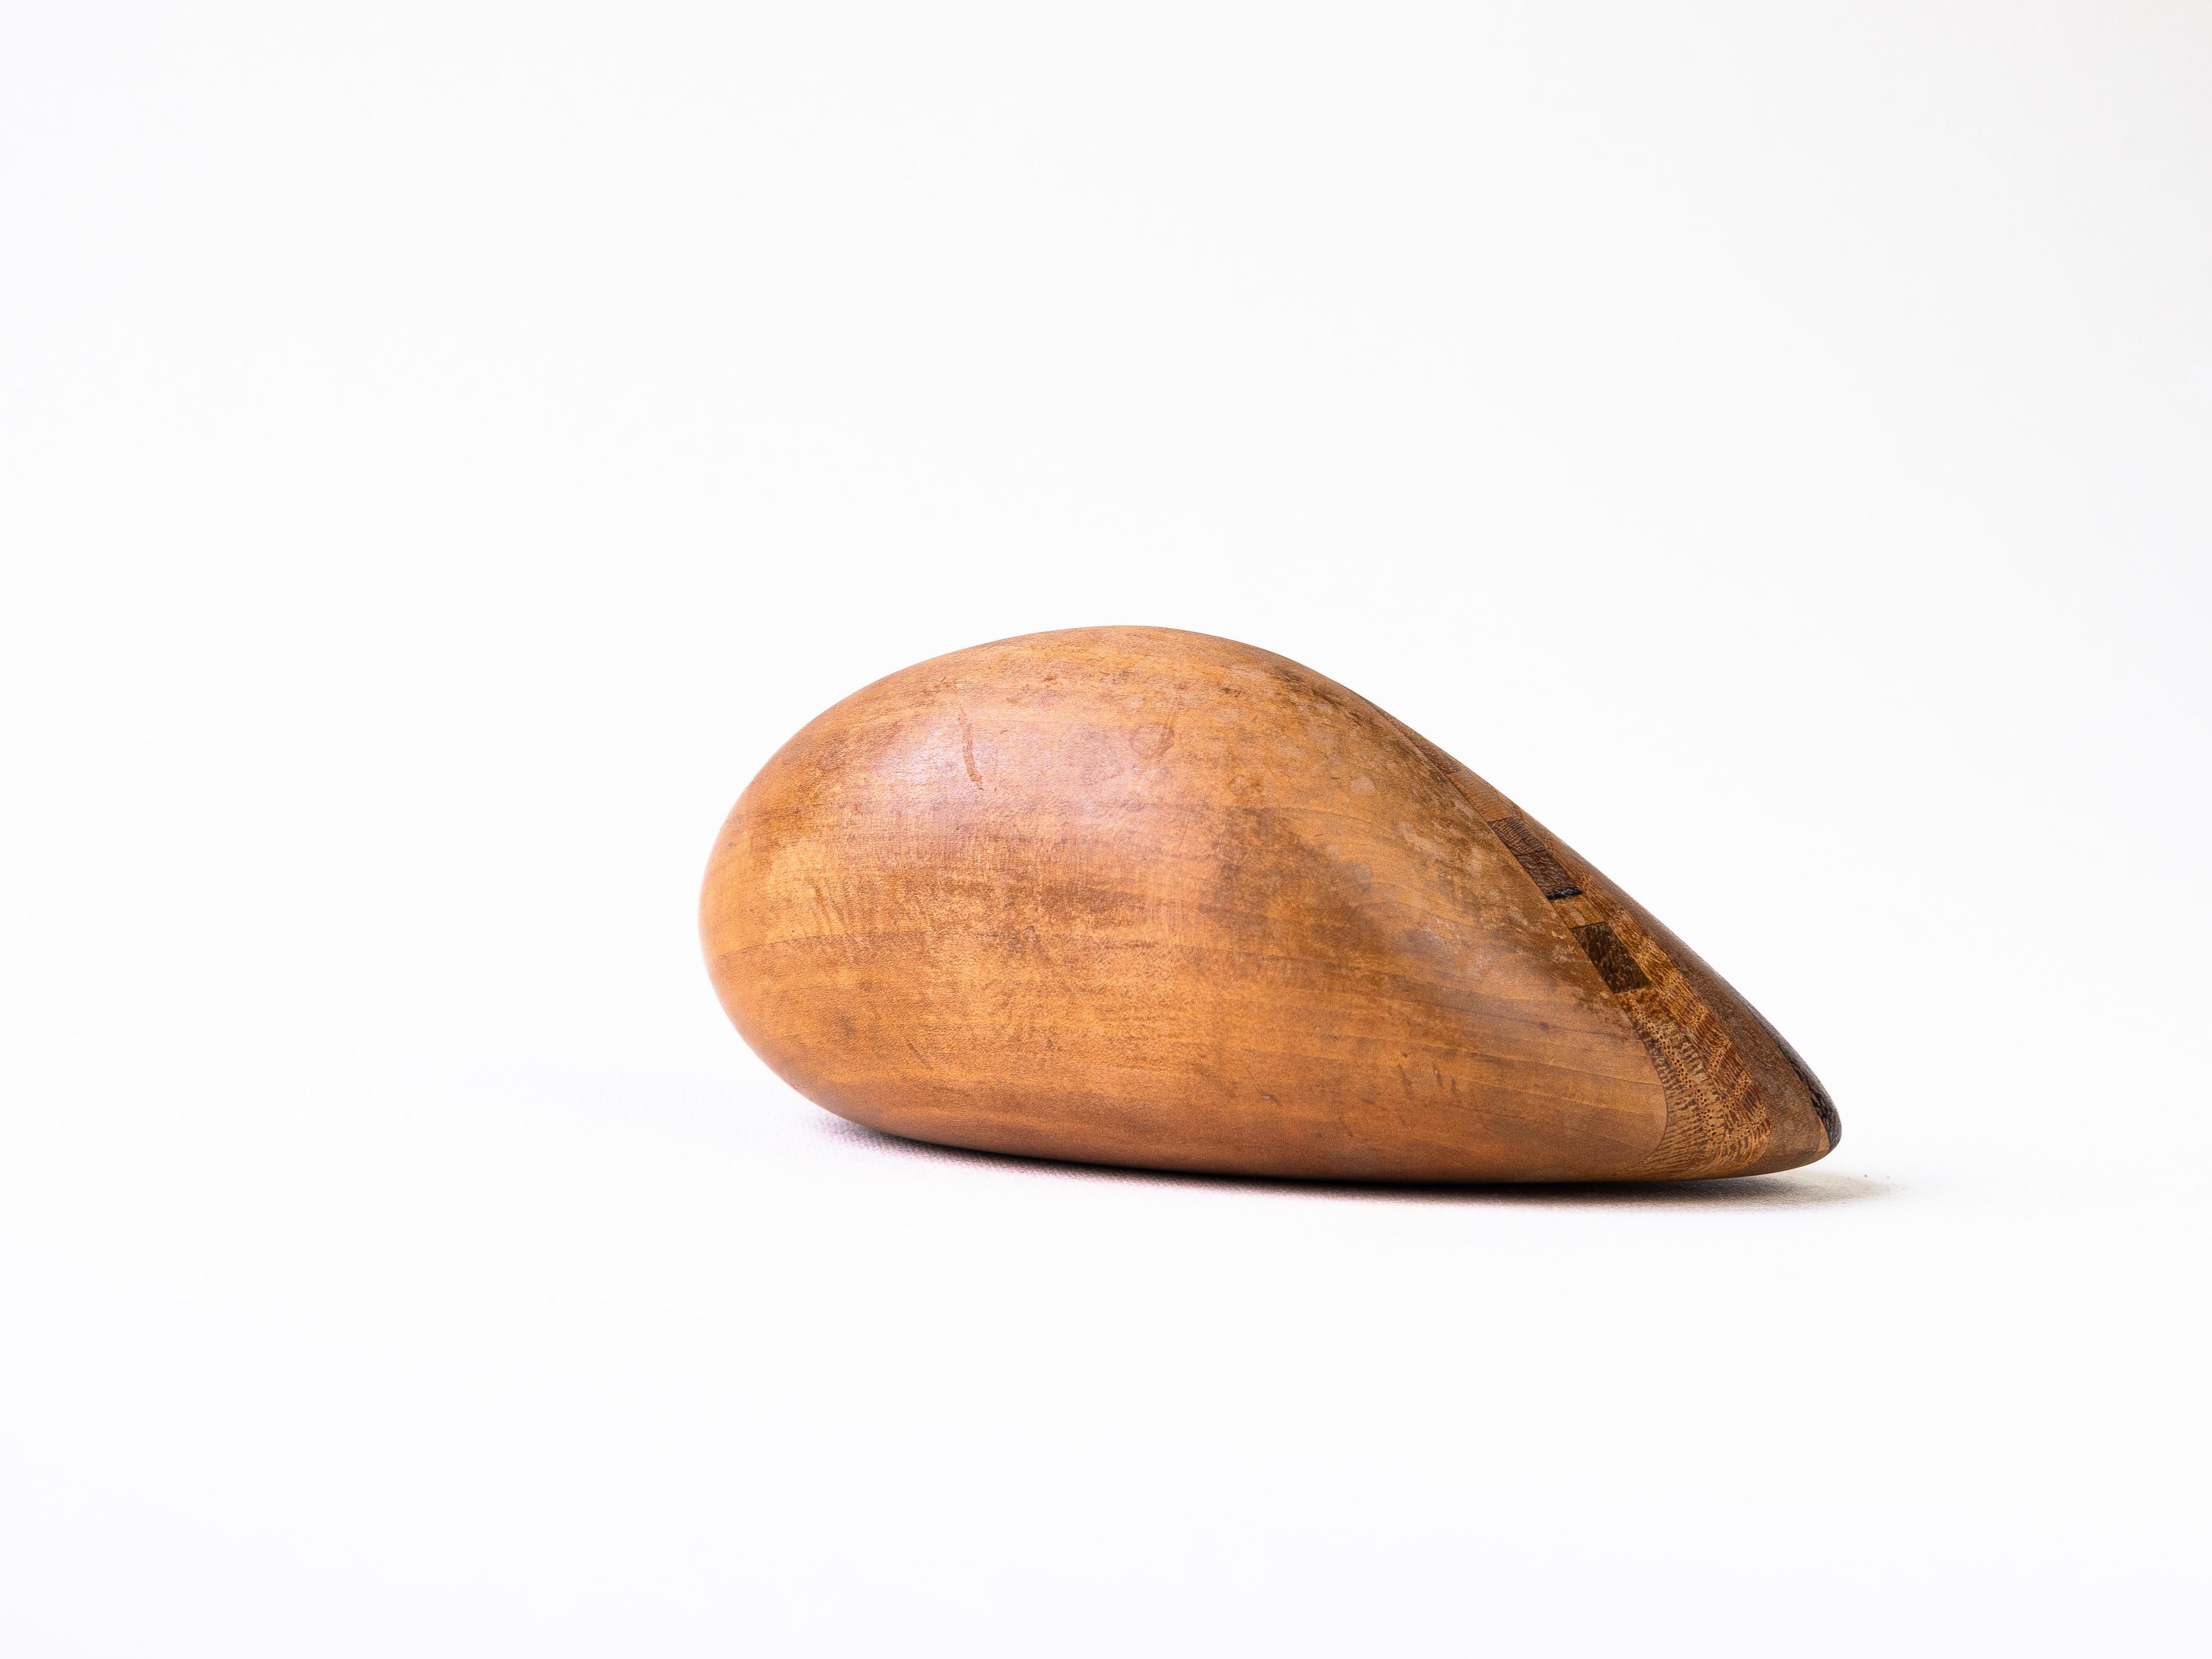 Hand-Crafted Sculpture Wooden Pebble, 1970s Desk Accessory, Marquetry Paperweight For Sale